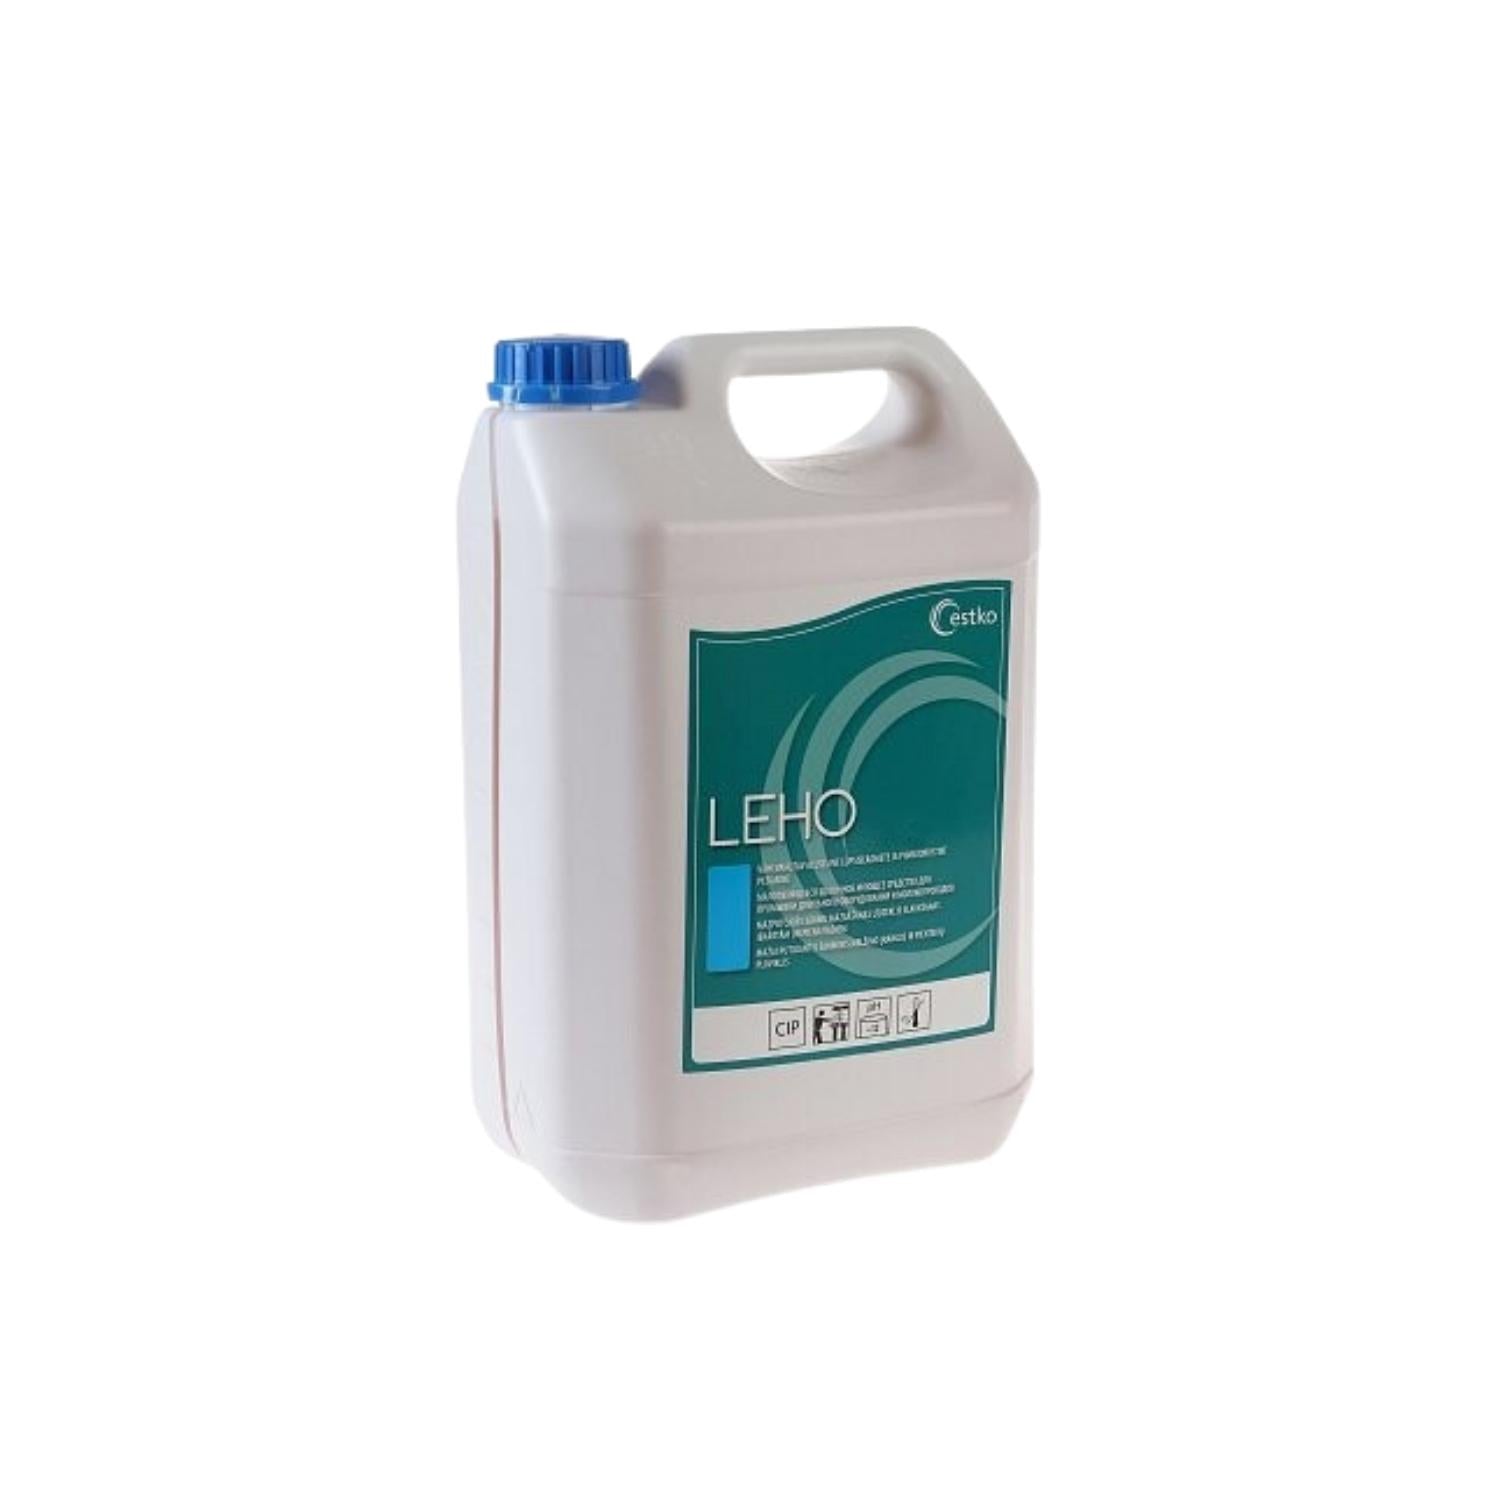 LEHO 5L Alkaline detergent for milking devices and milk ducts